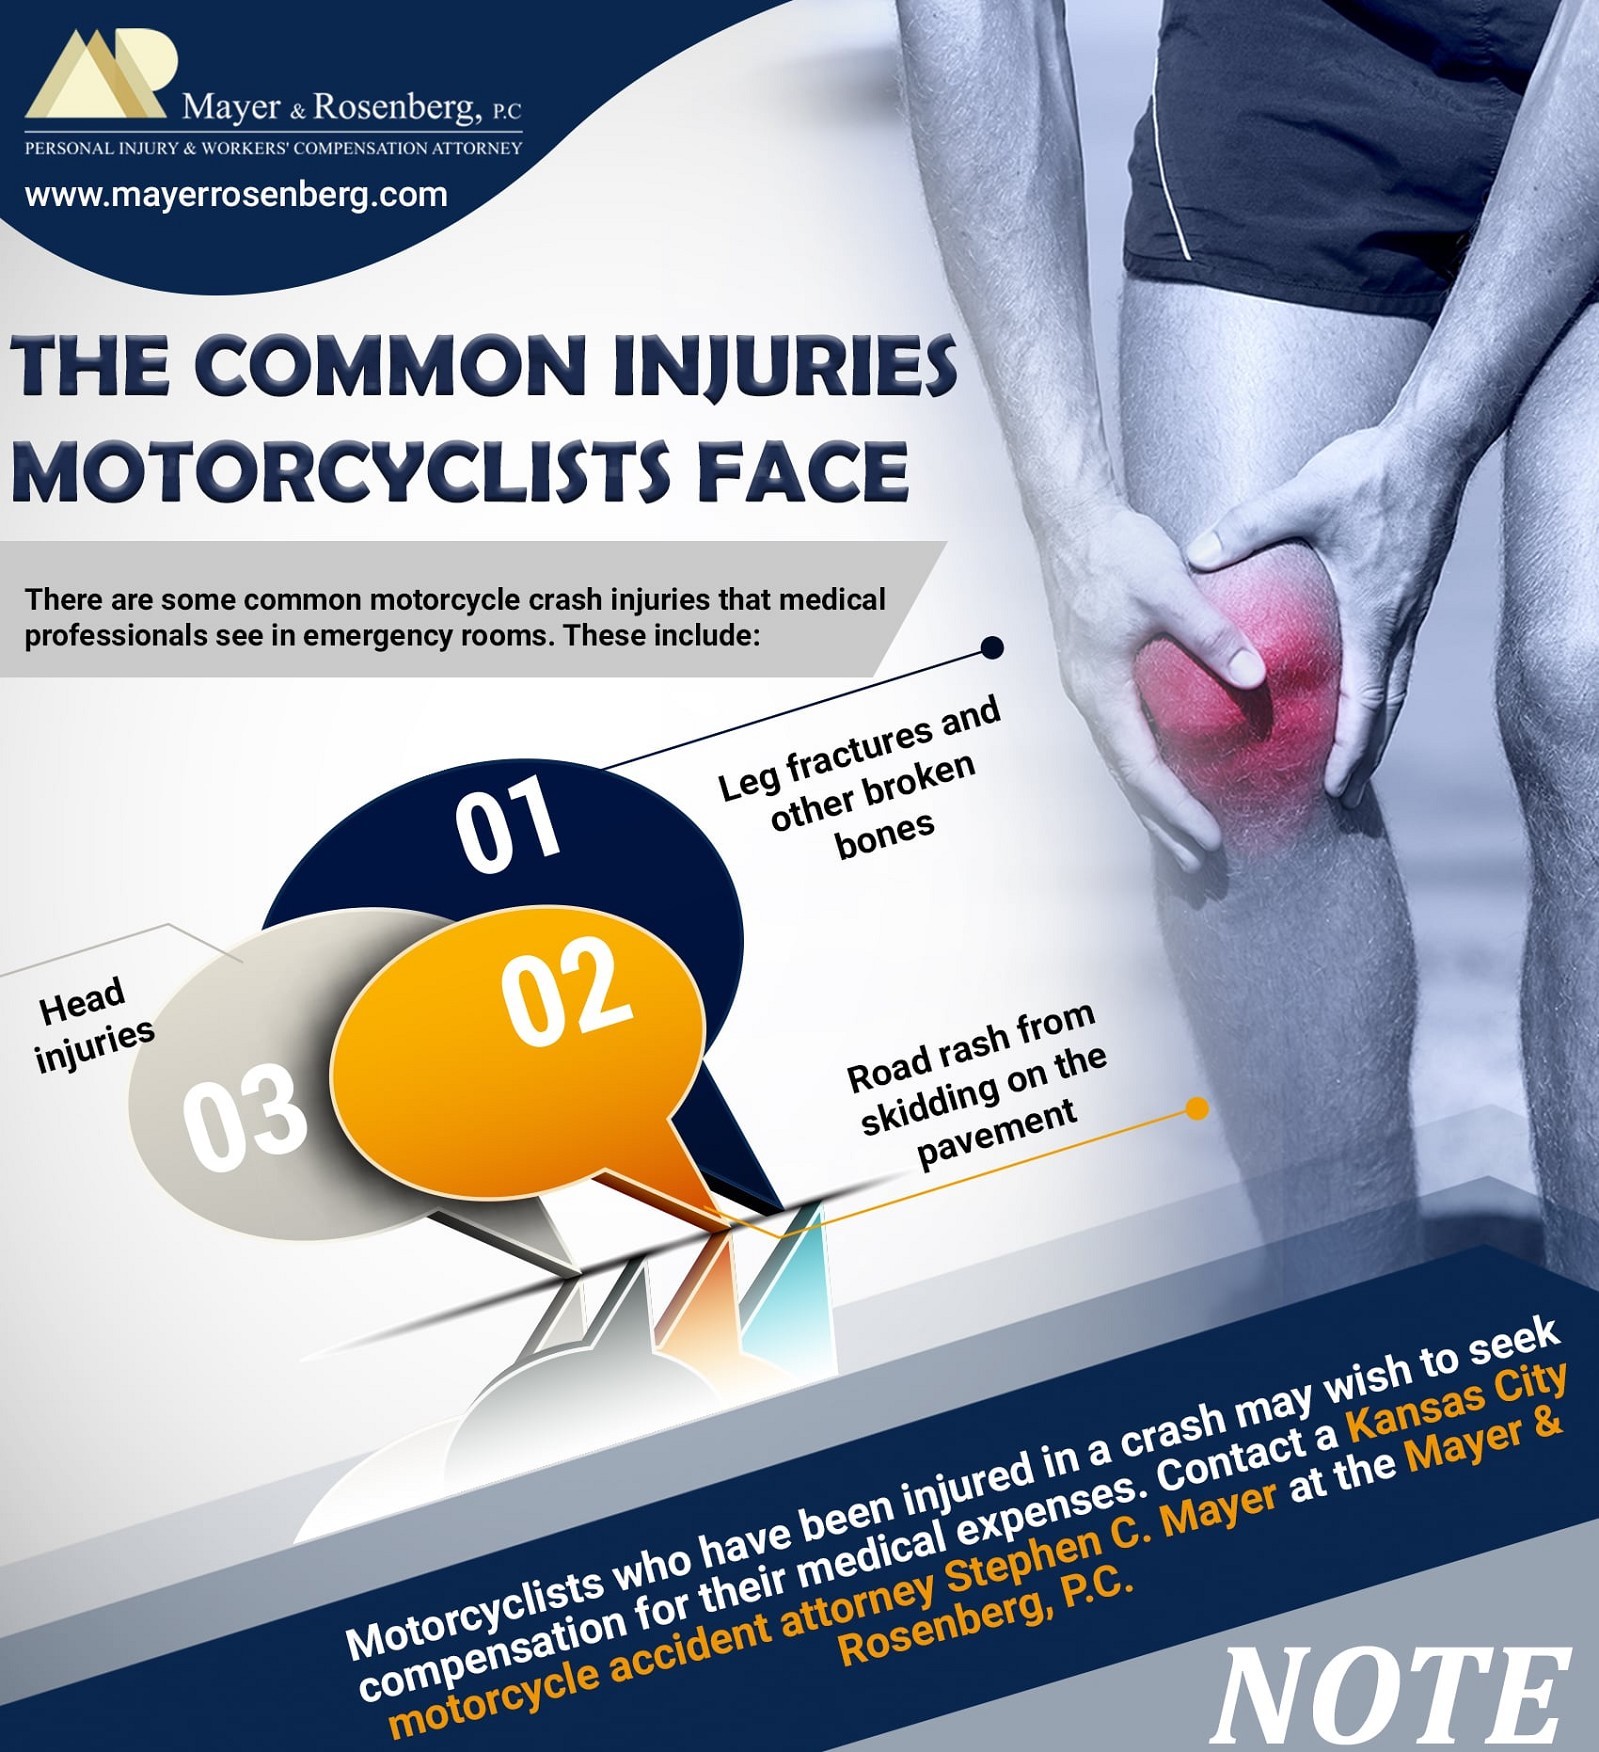 The Common Injuries Motorcyclists Face